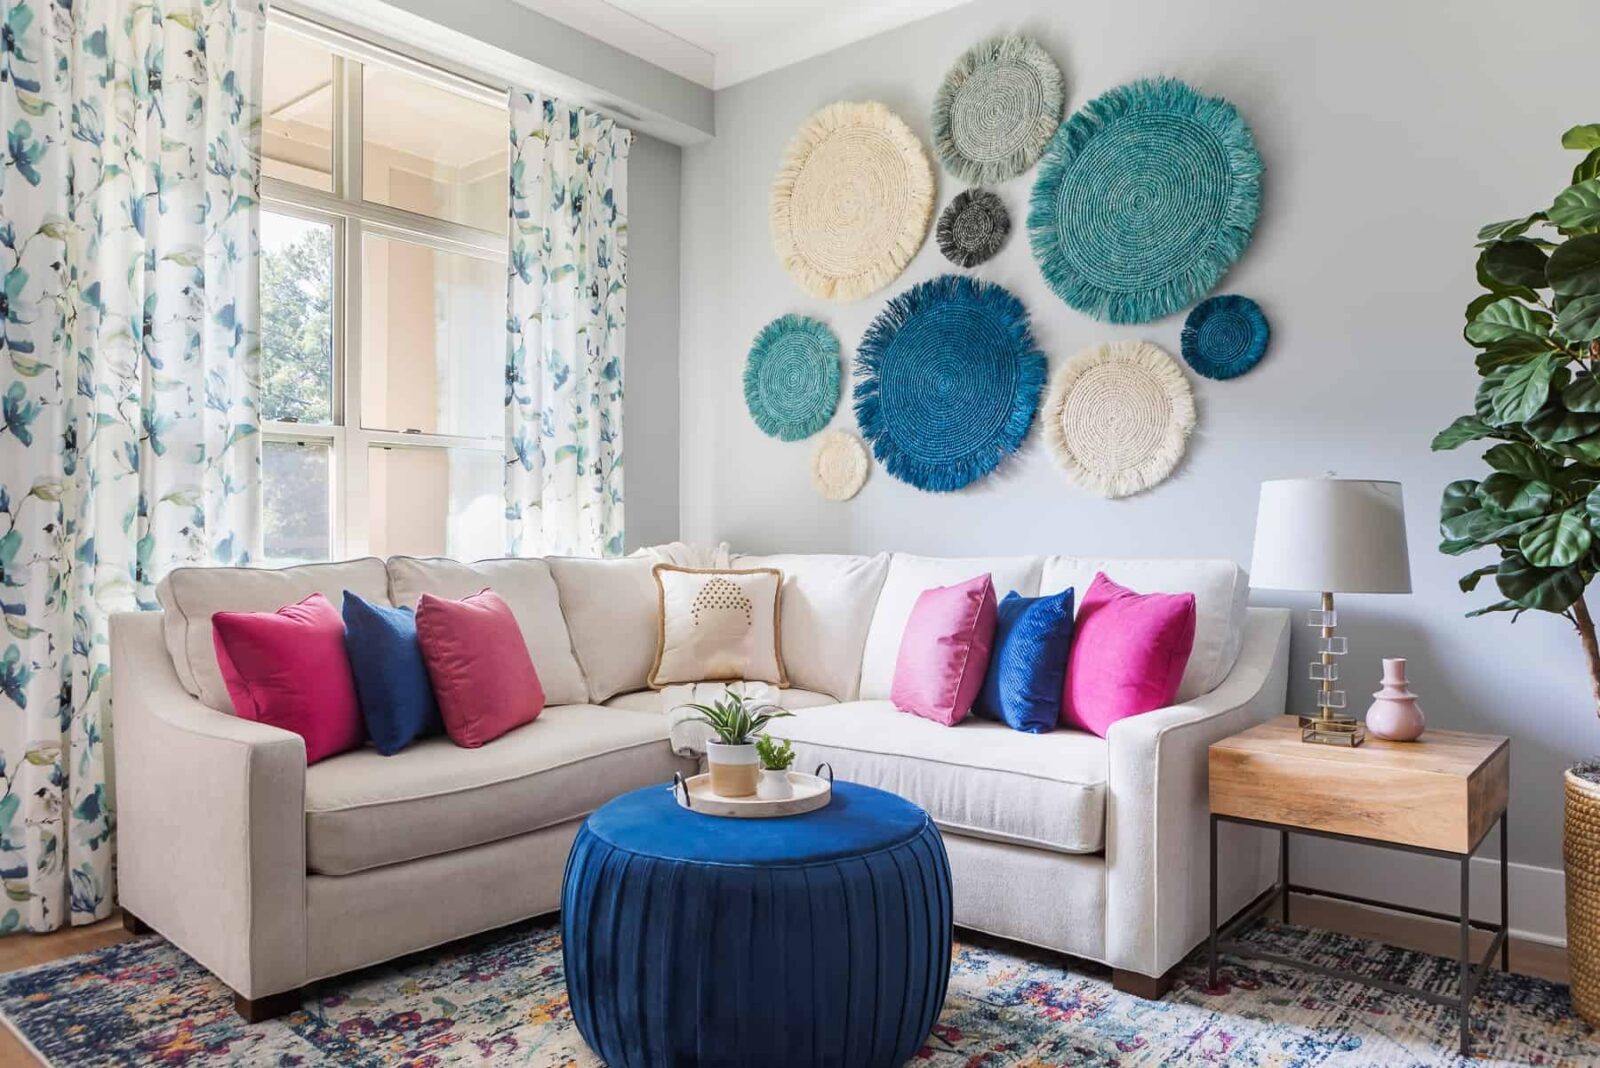 family room white sectional sofa with colorful pillows blue ottoman colorful rug draperies curtains seagrass art